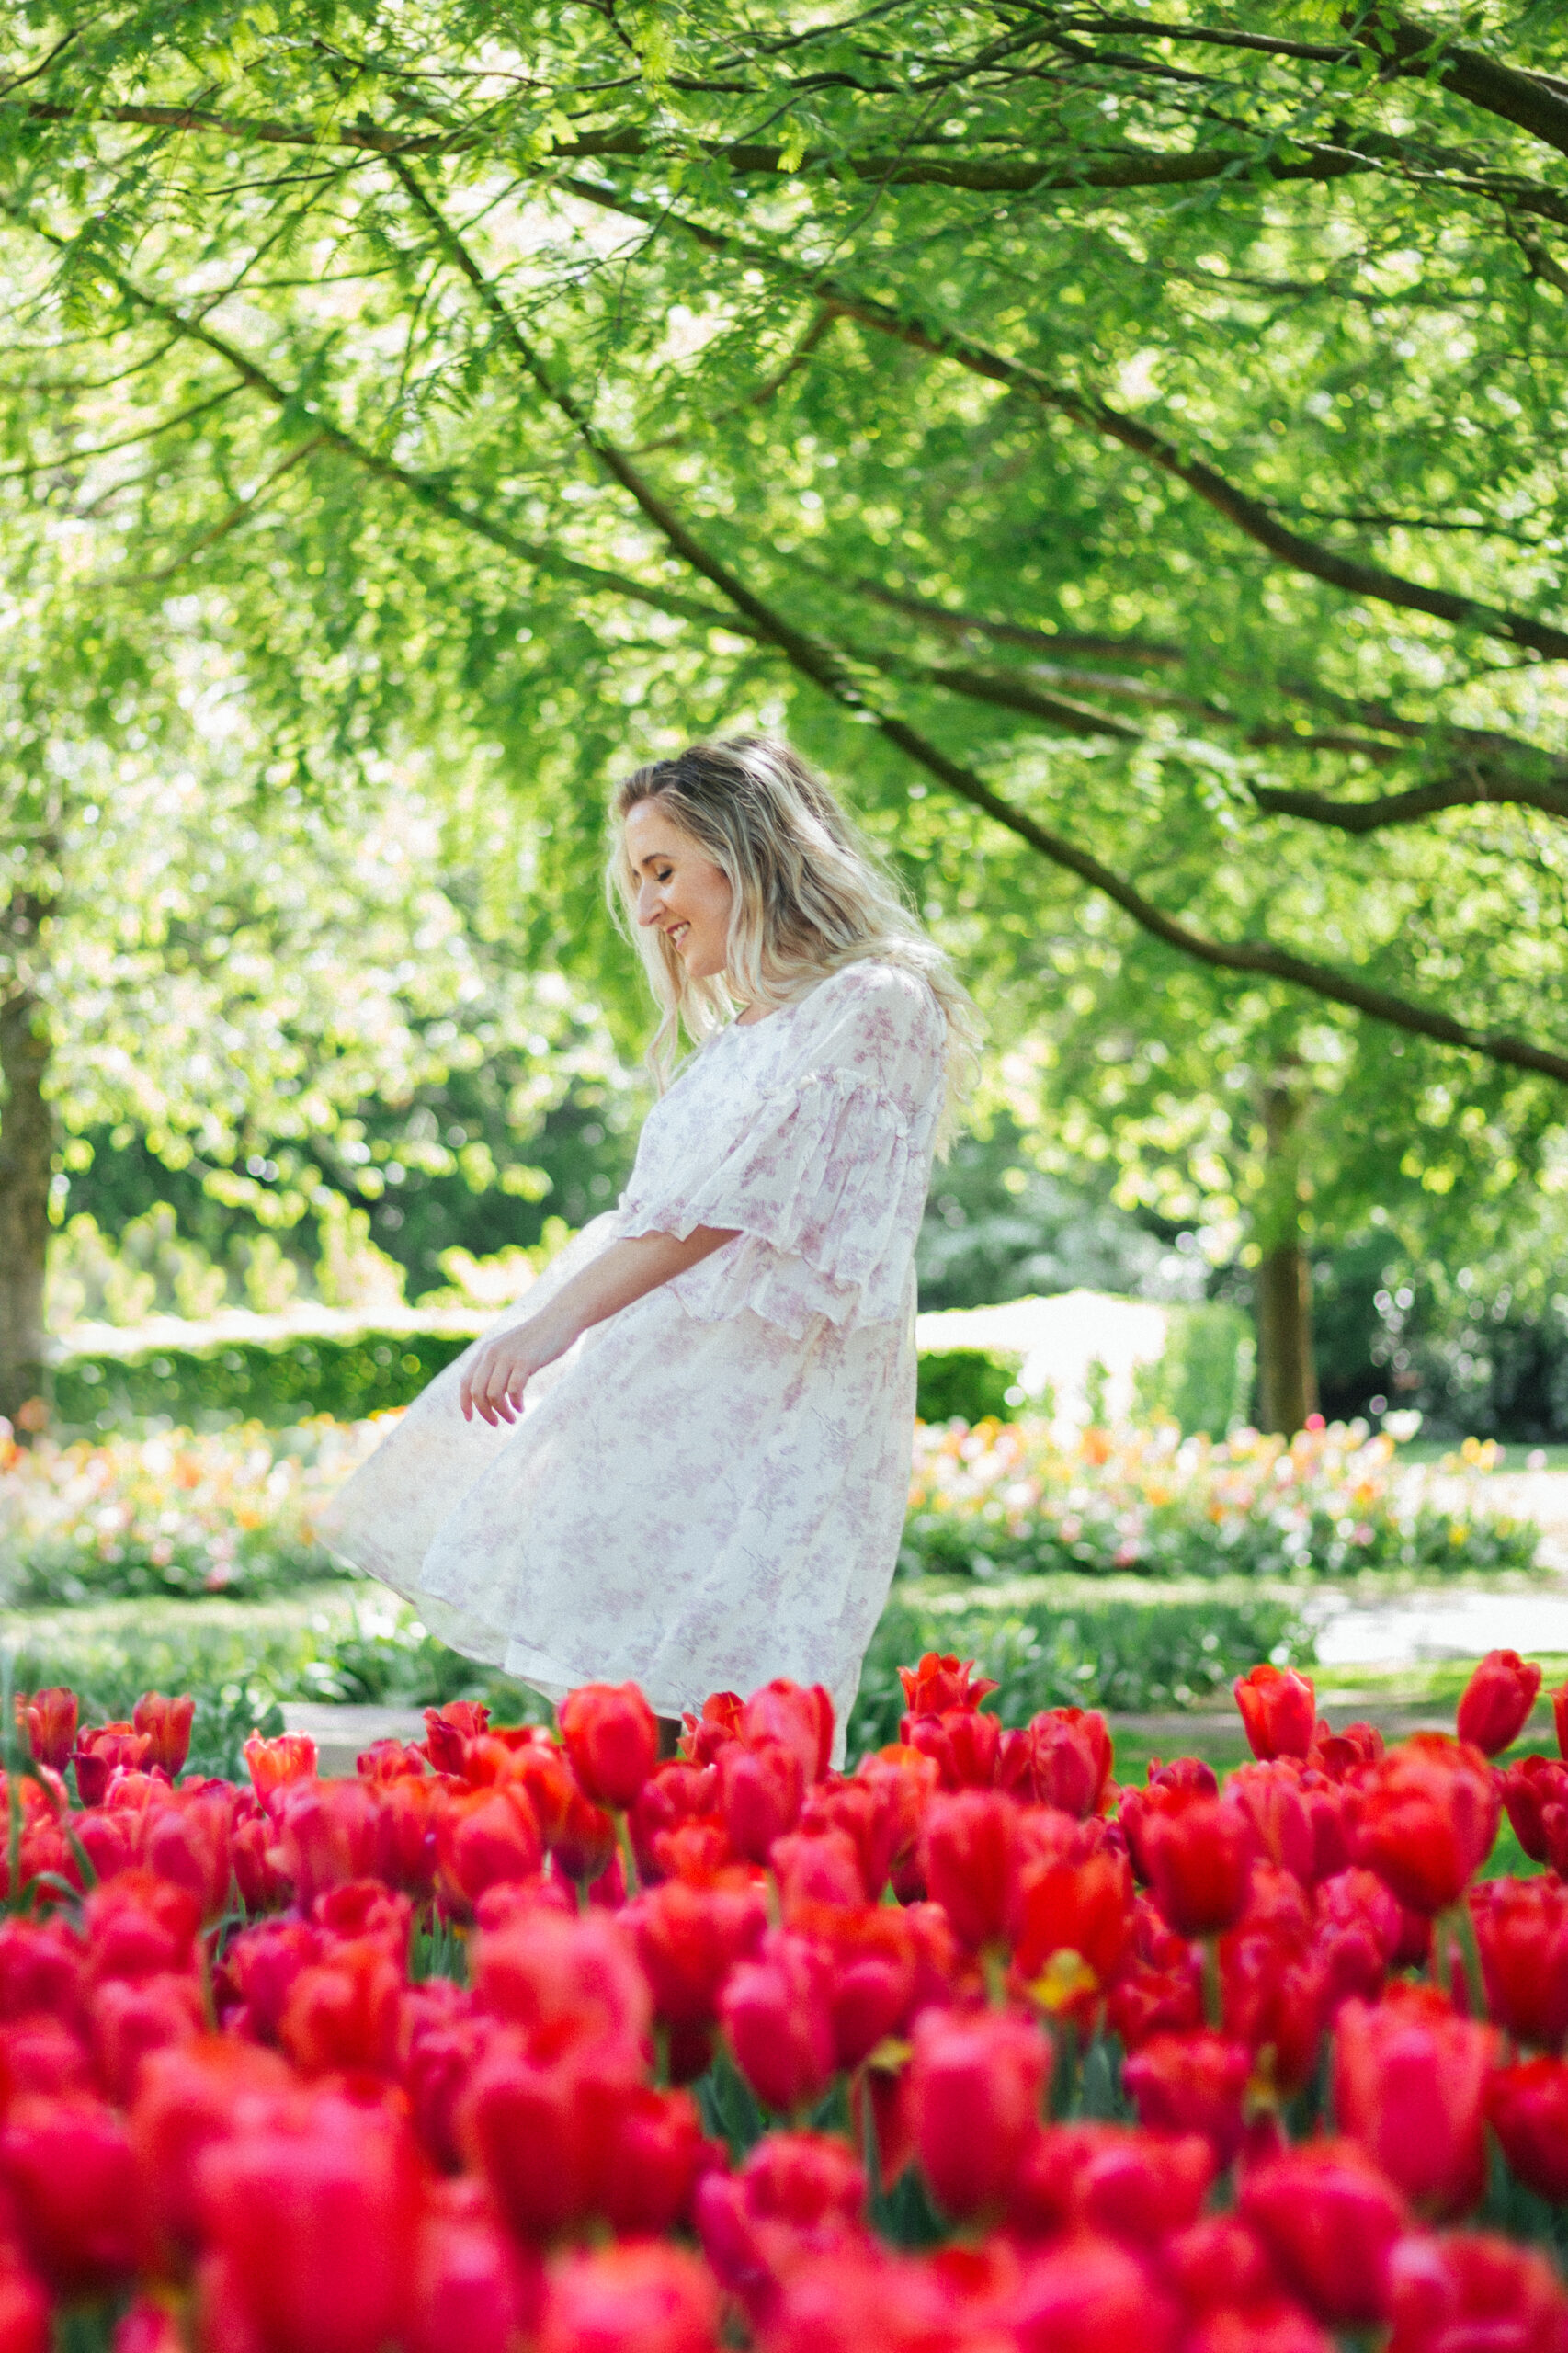 Blonde woman smiling at the Keukenhof tulip gardens surrounded by nature, trees, and red tulips.